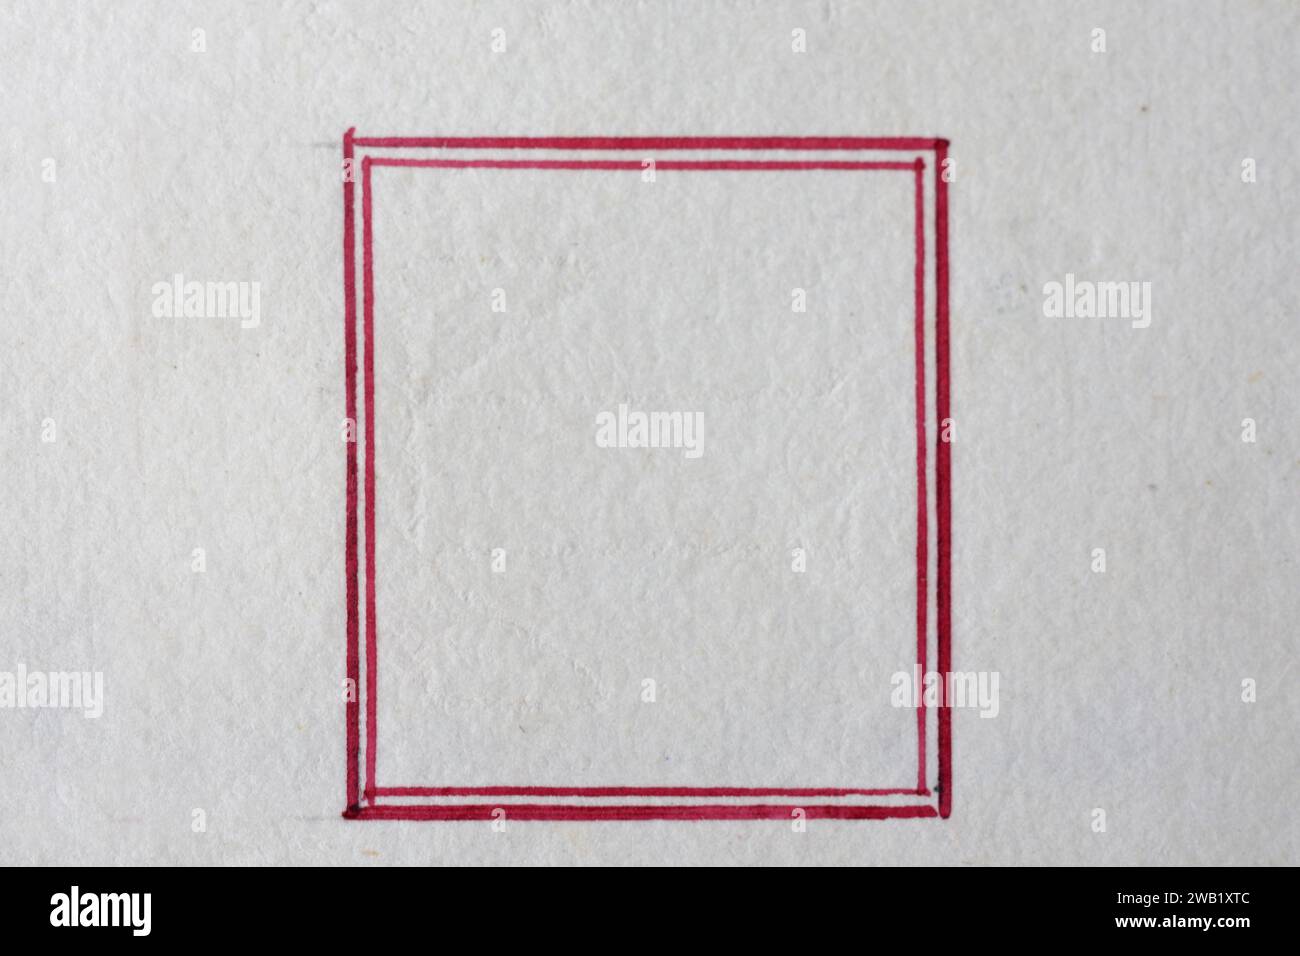 antique square frame red made with nib on paper Stock Photo